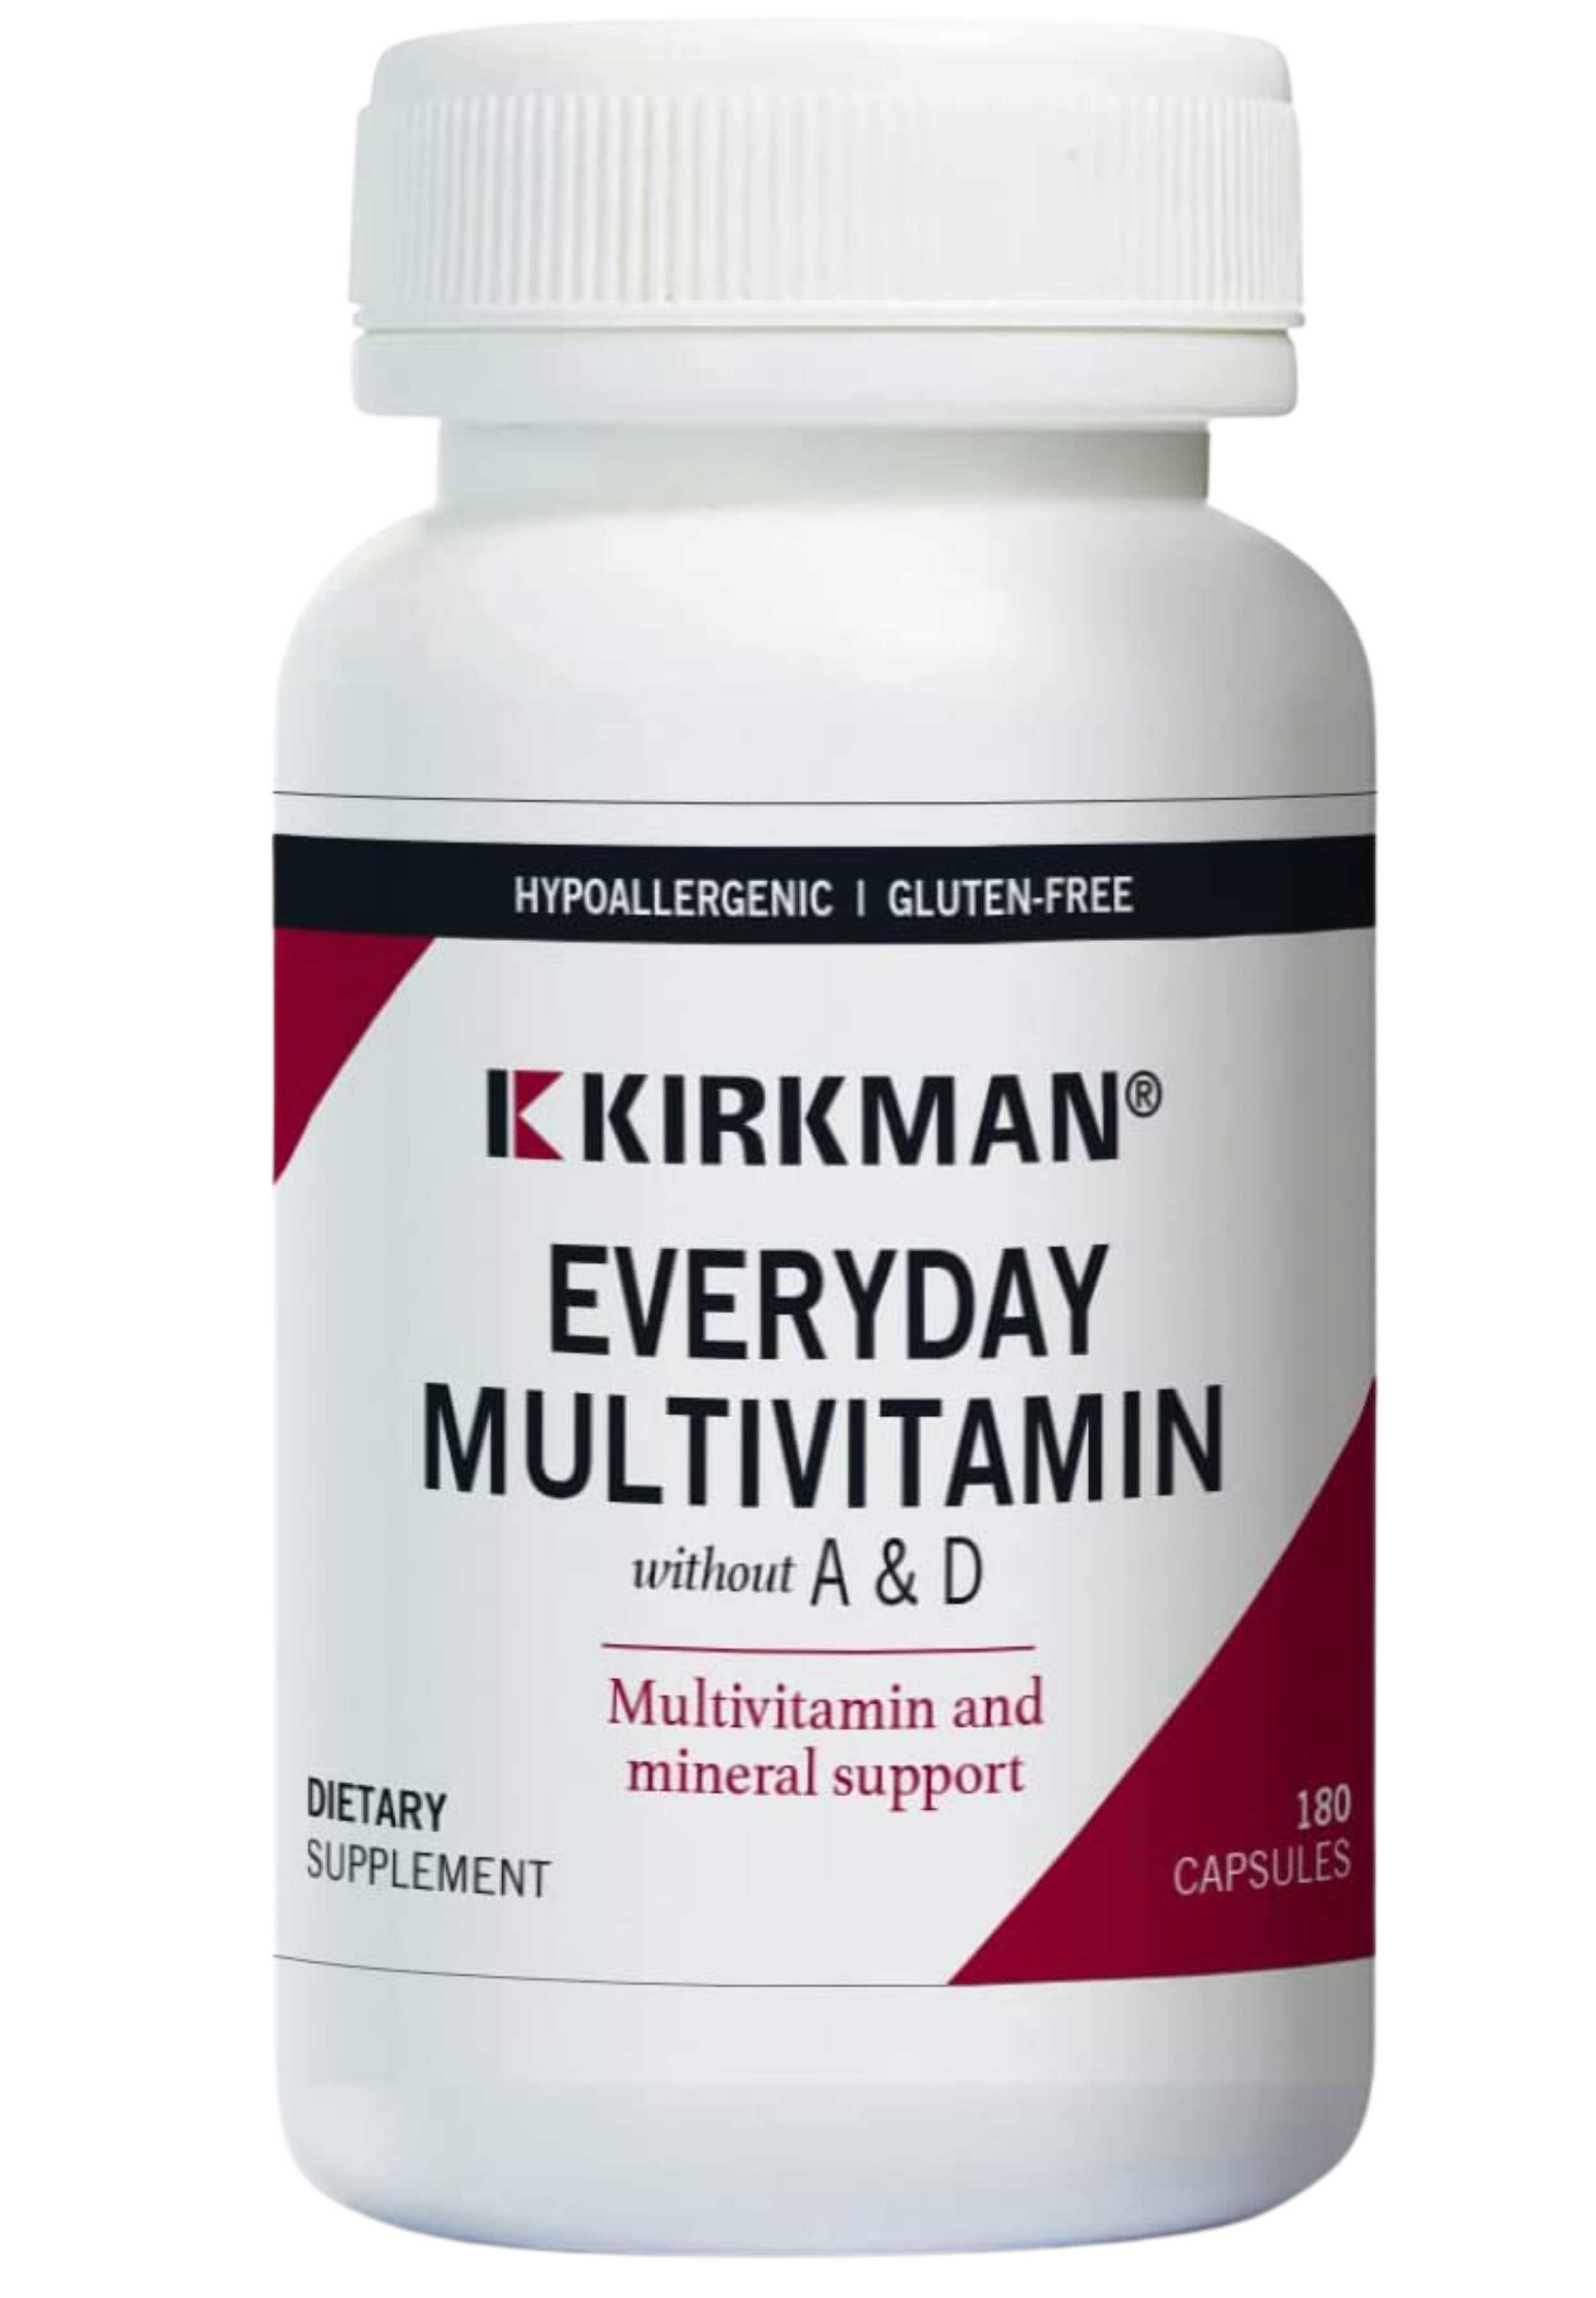 Kirkman Everyday Multivitamin Without A & D